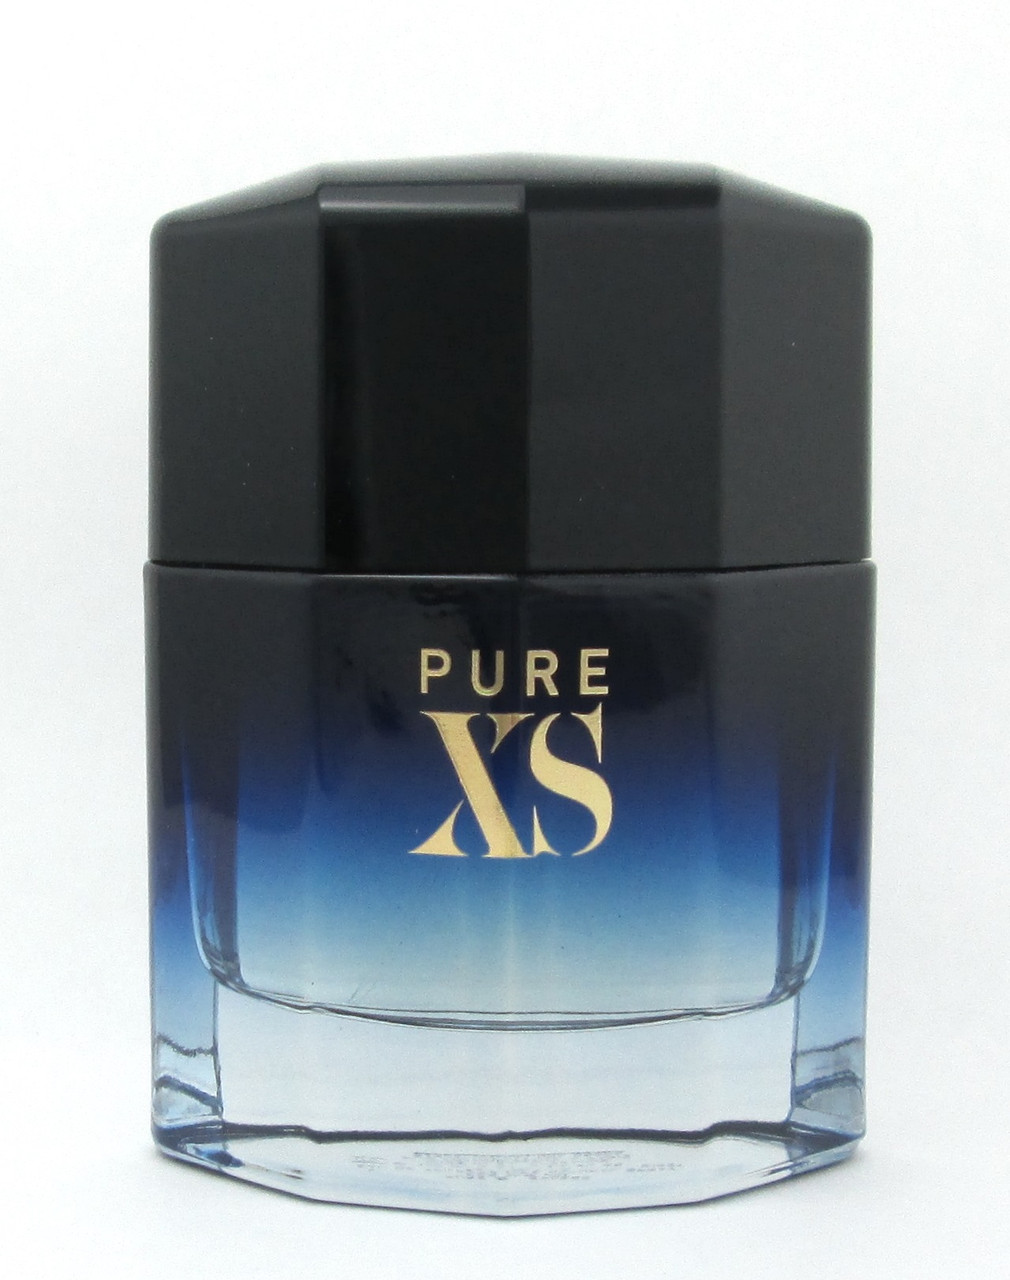 PURE XS by Paco Rabanne EDT Spray for Men 3.4 oz. Brand New Tester with ...